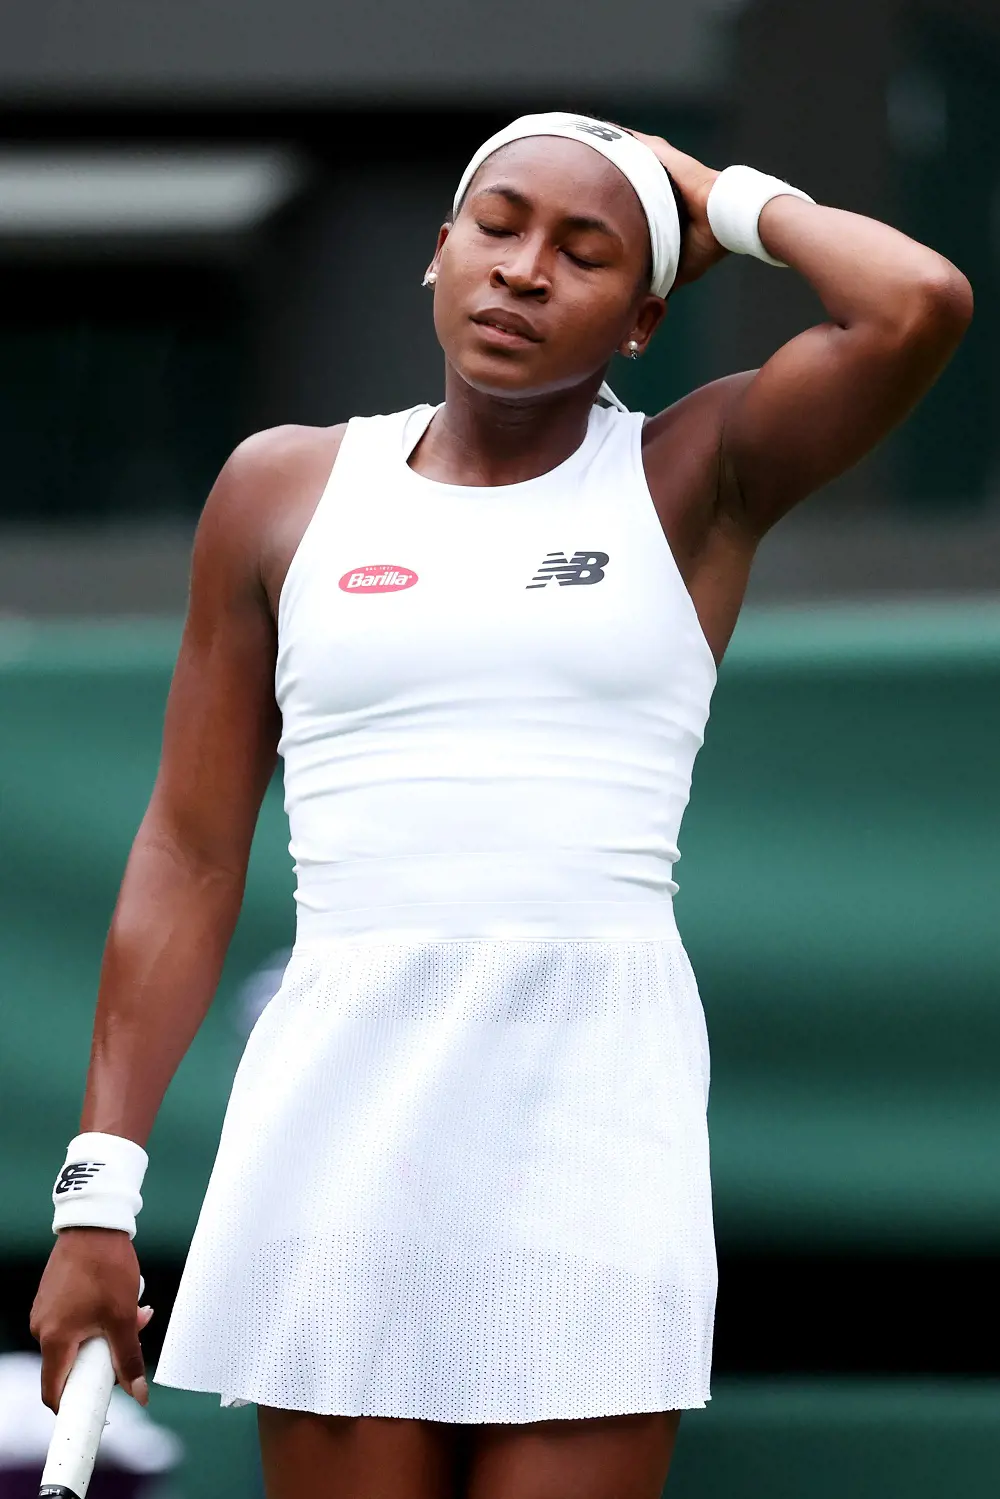 Gauff lost her R1 match and is out of the competition in 2023